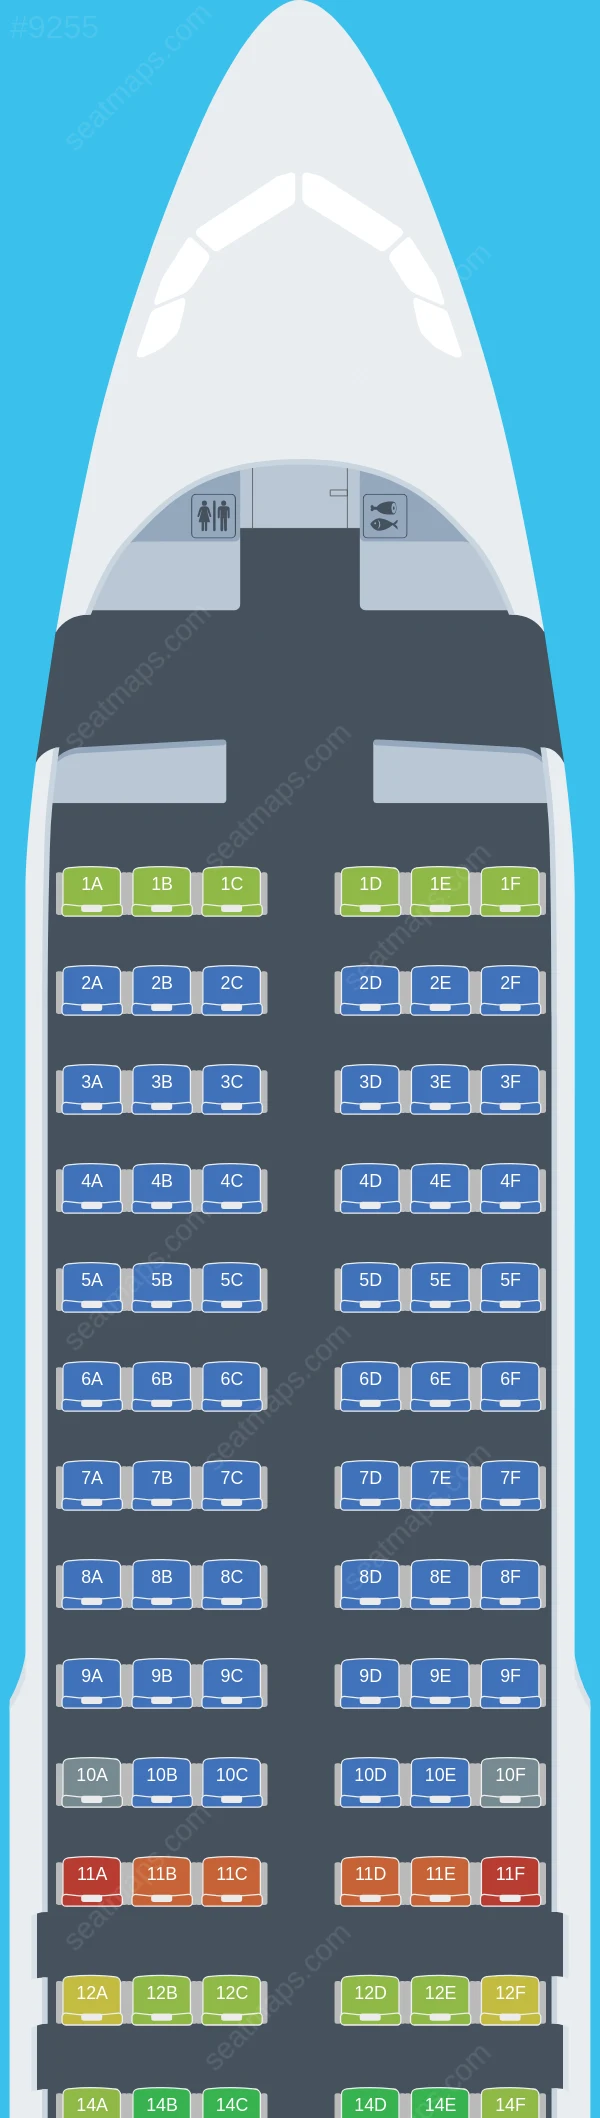 JetSMART Argentina Airbus A320-200 seatmap preview